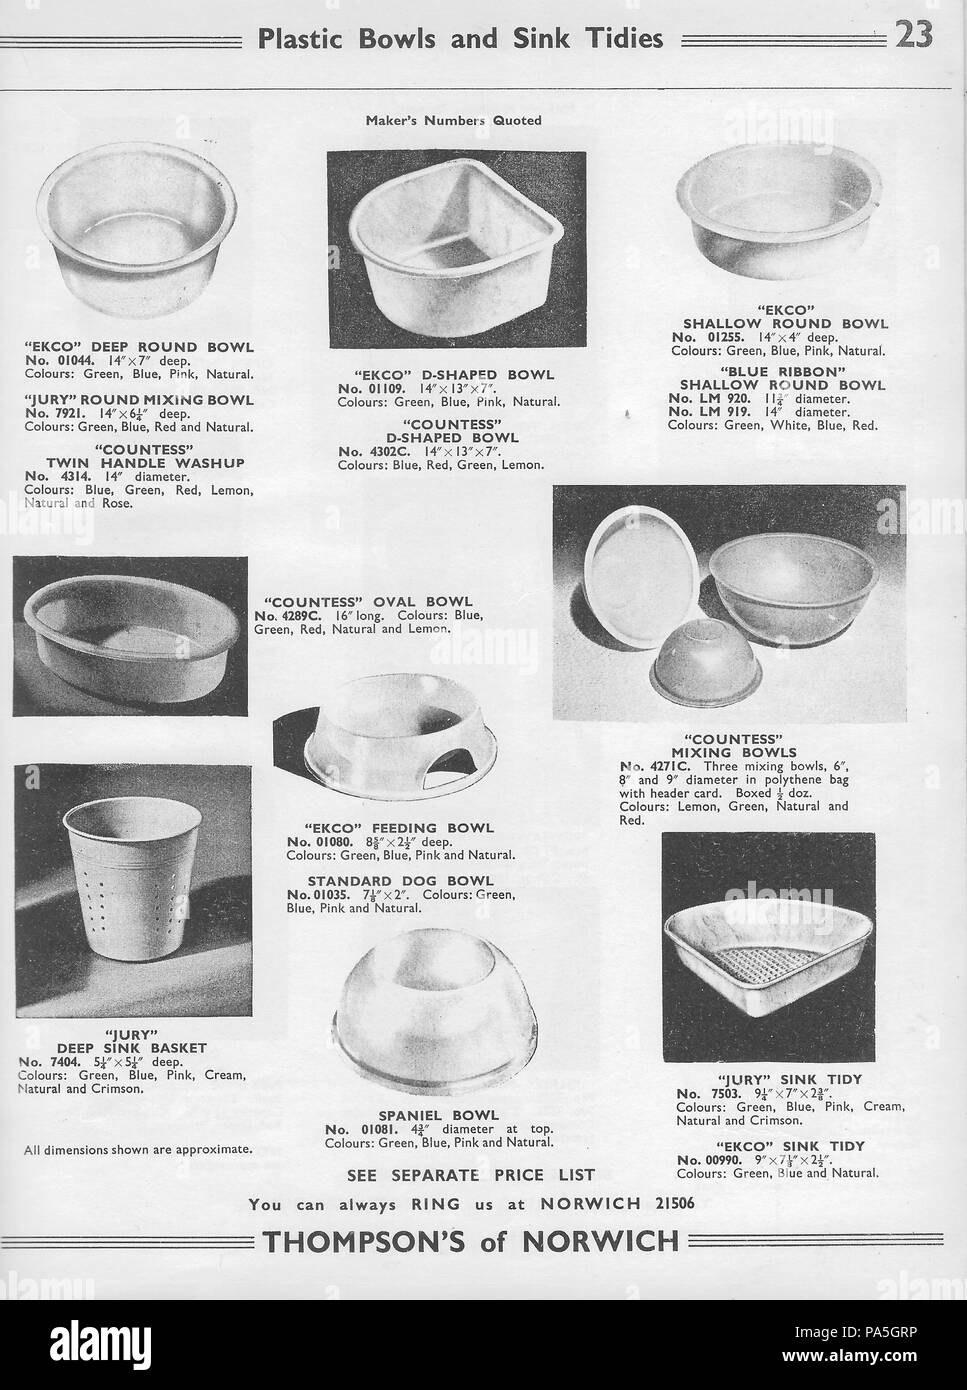 General wholesale catalogue hardware factors H. Thompson & Sons Ltd, Chalk Hill Works, Norwich, England, UK 1940s 1950s retro vintage household products items illustrated pictures drawings illustrations monochrome black and white Stock Photo